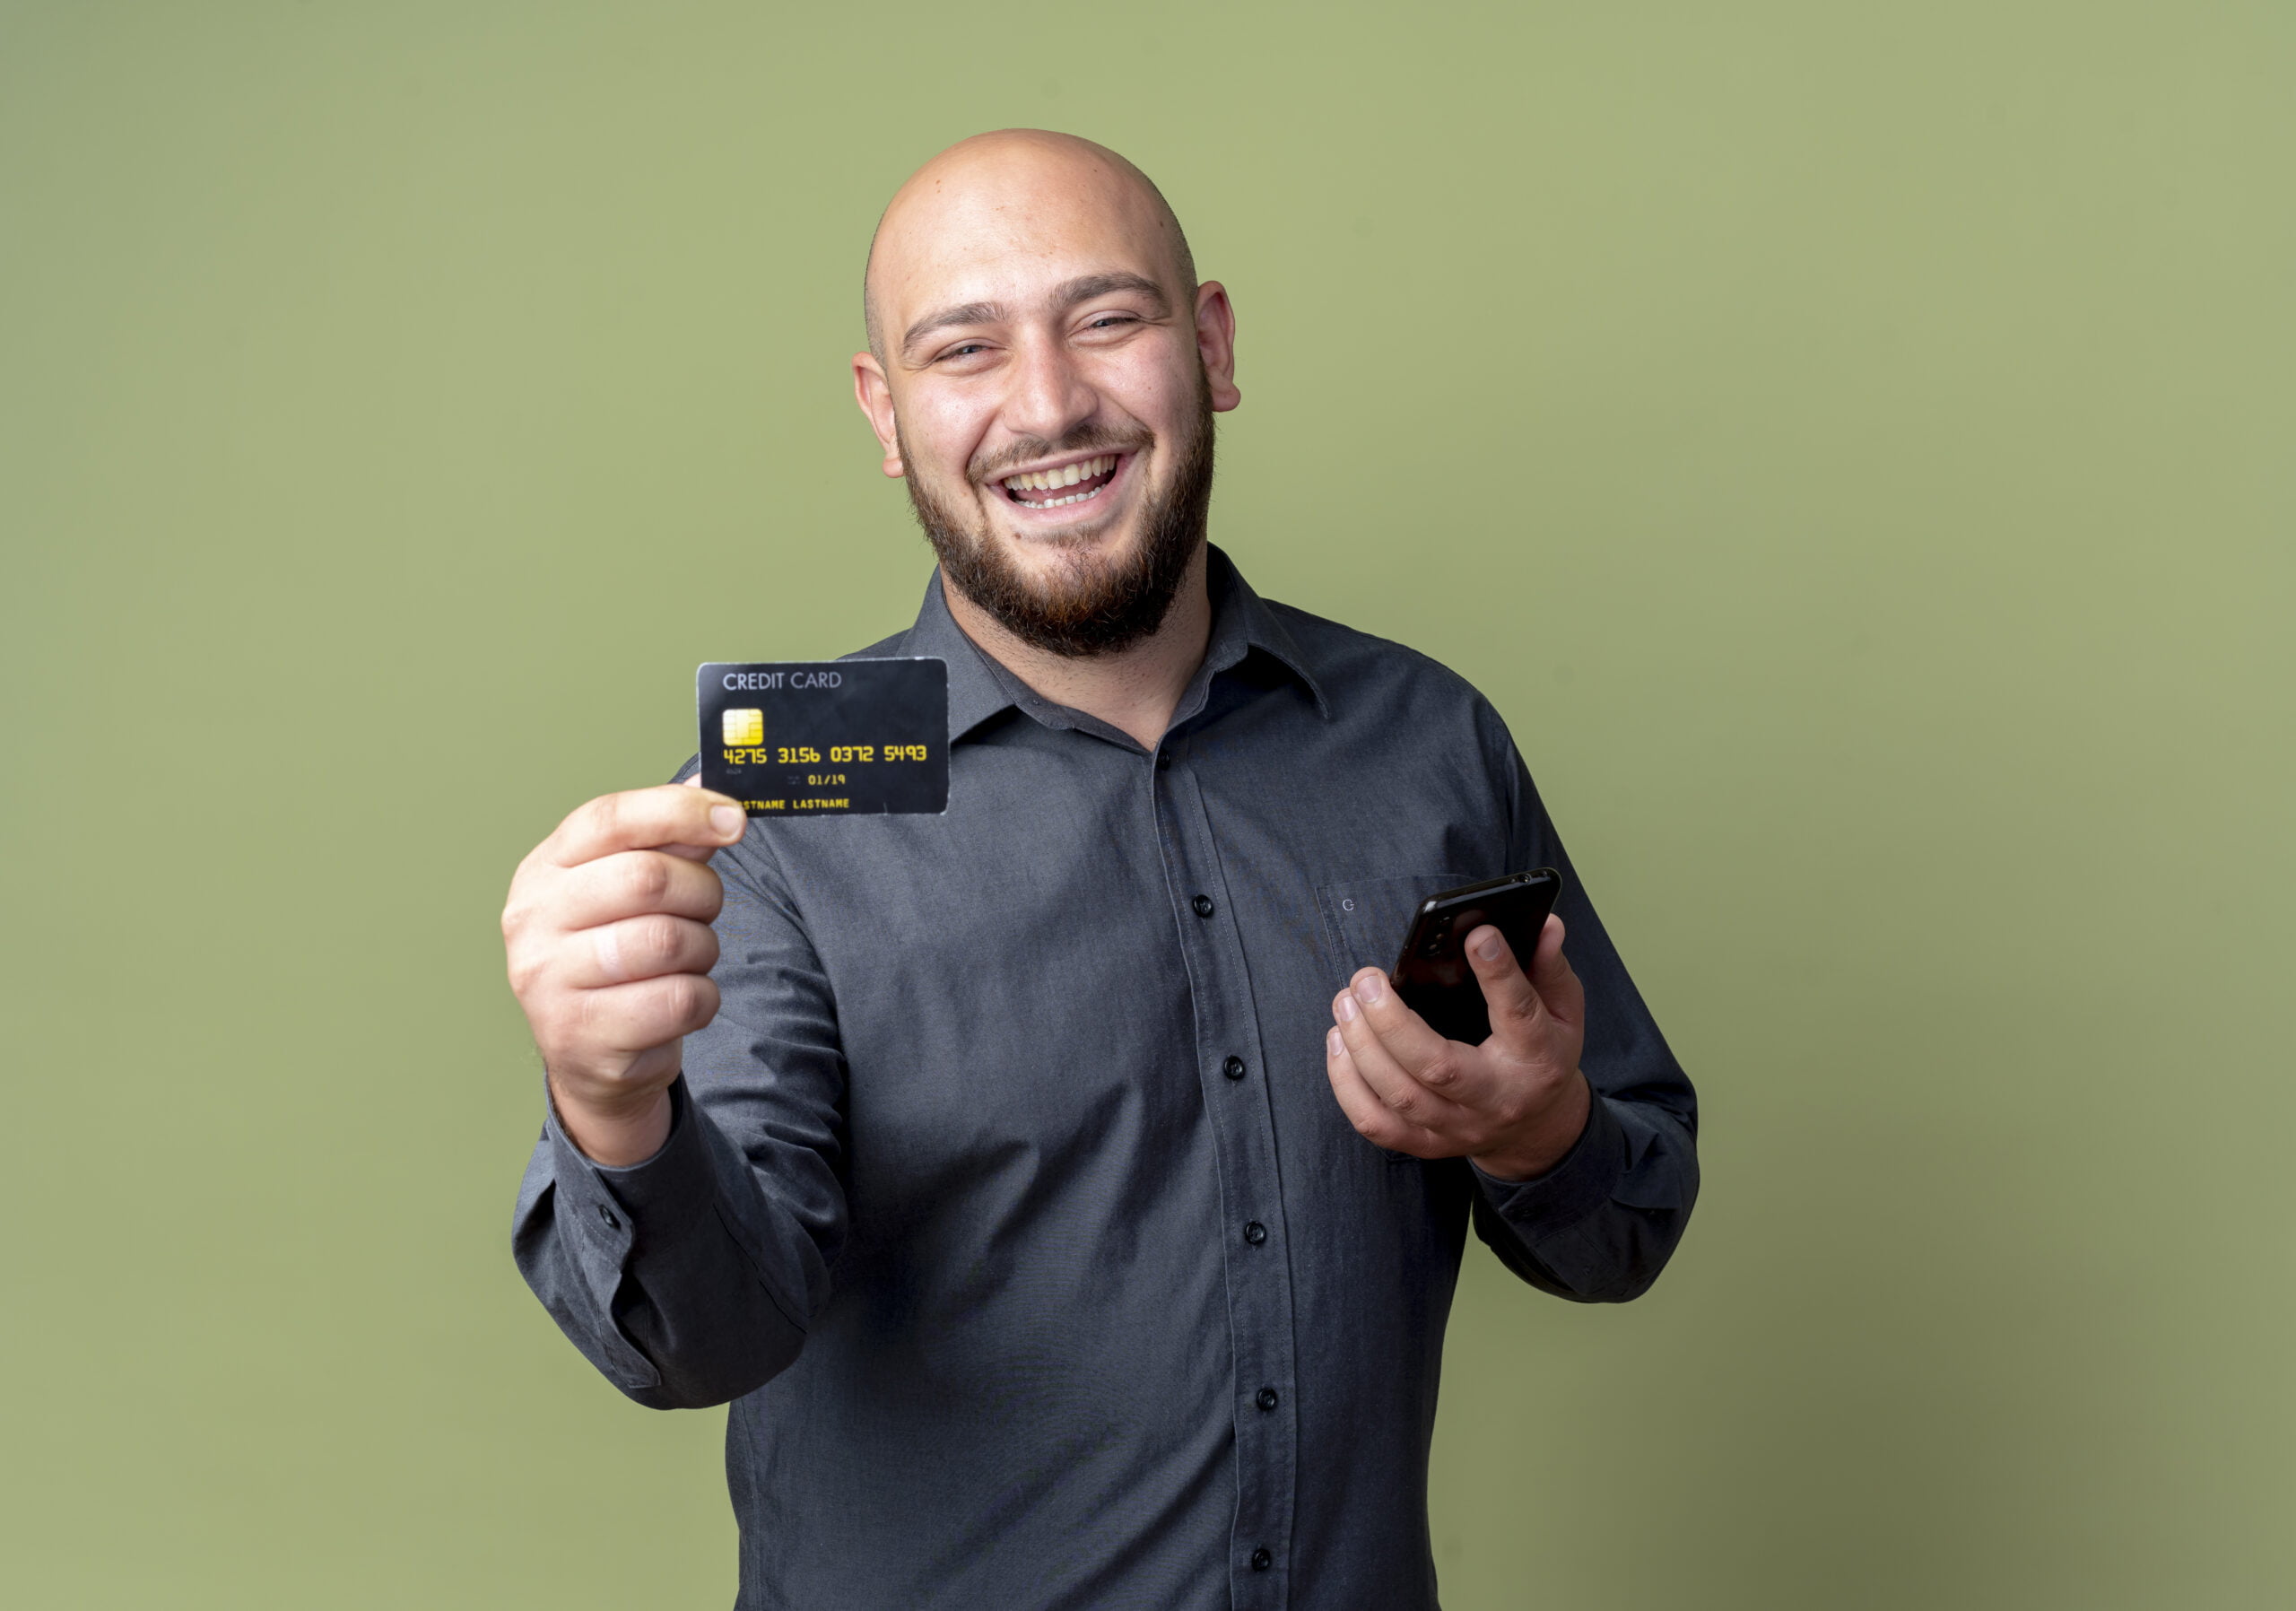 joyful young bald call center man holding mobile phone and stretching out credit card at camera isolated on olive green background with copy space